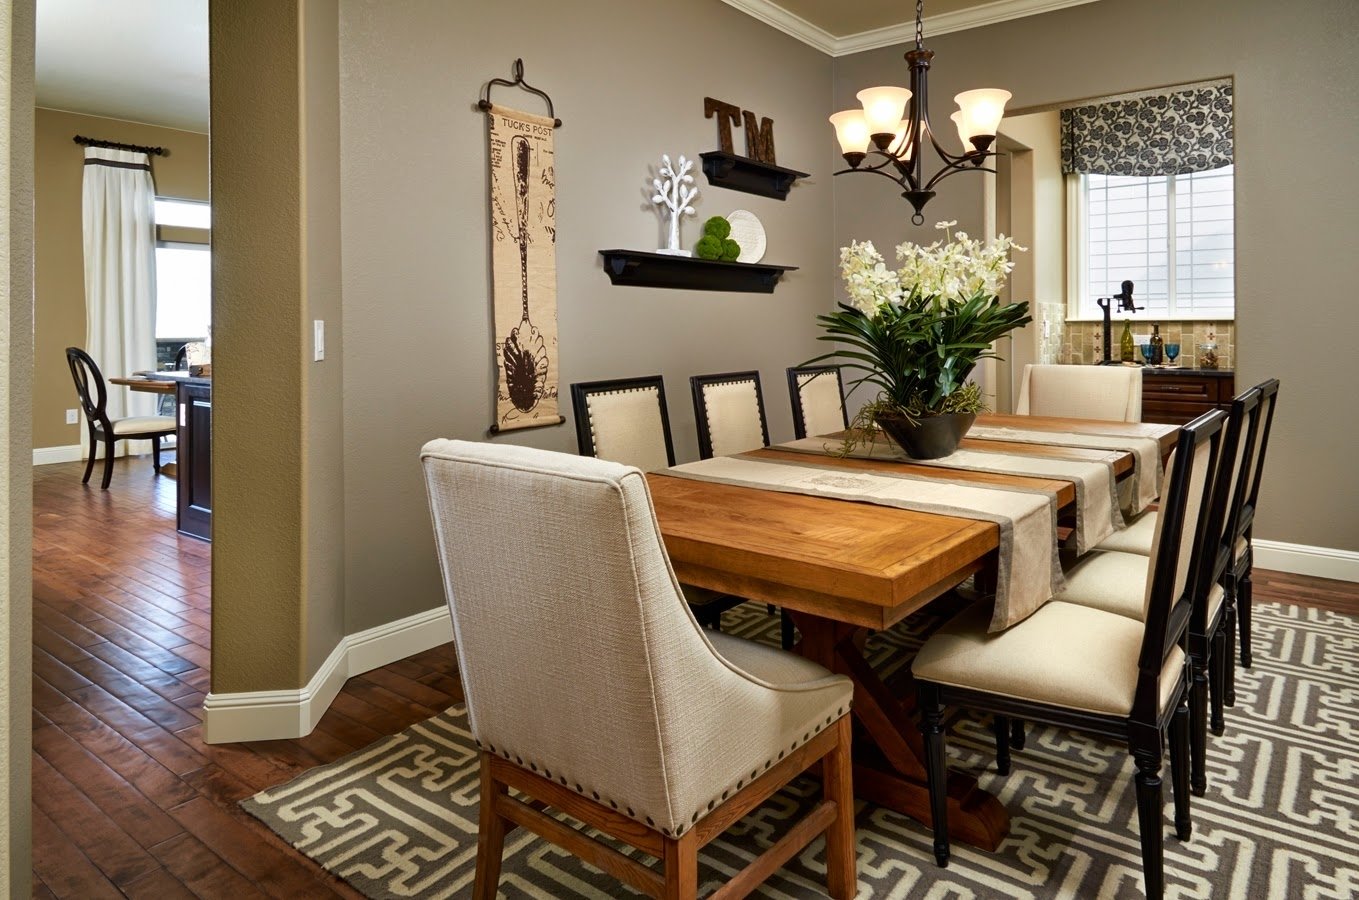 Ideas For A Dining Room Table Centerpiece